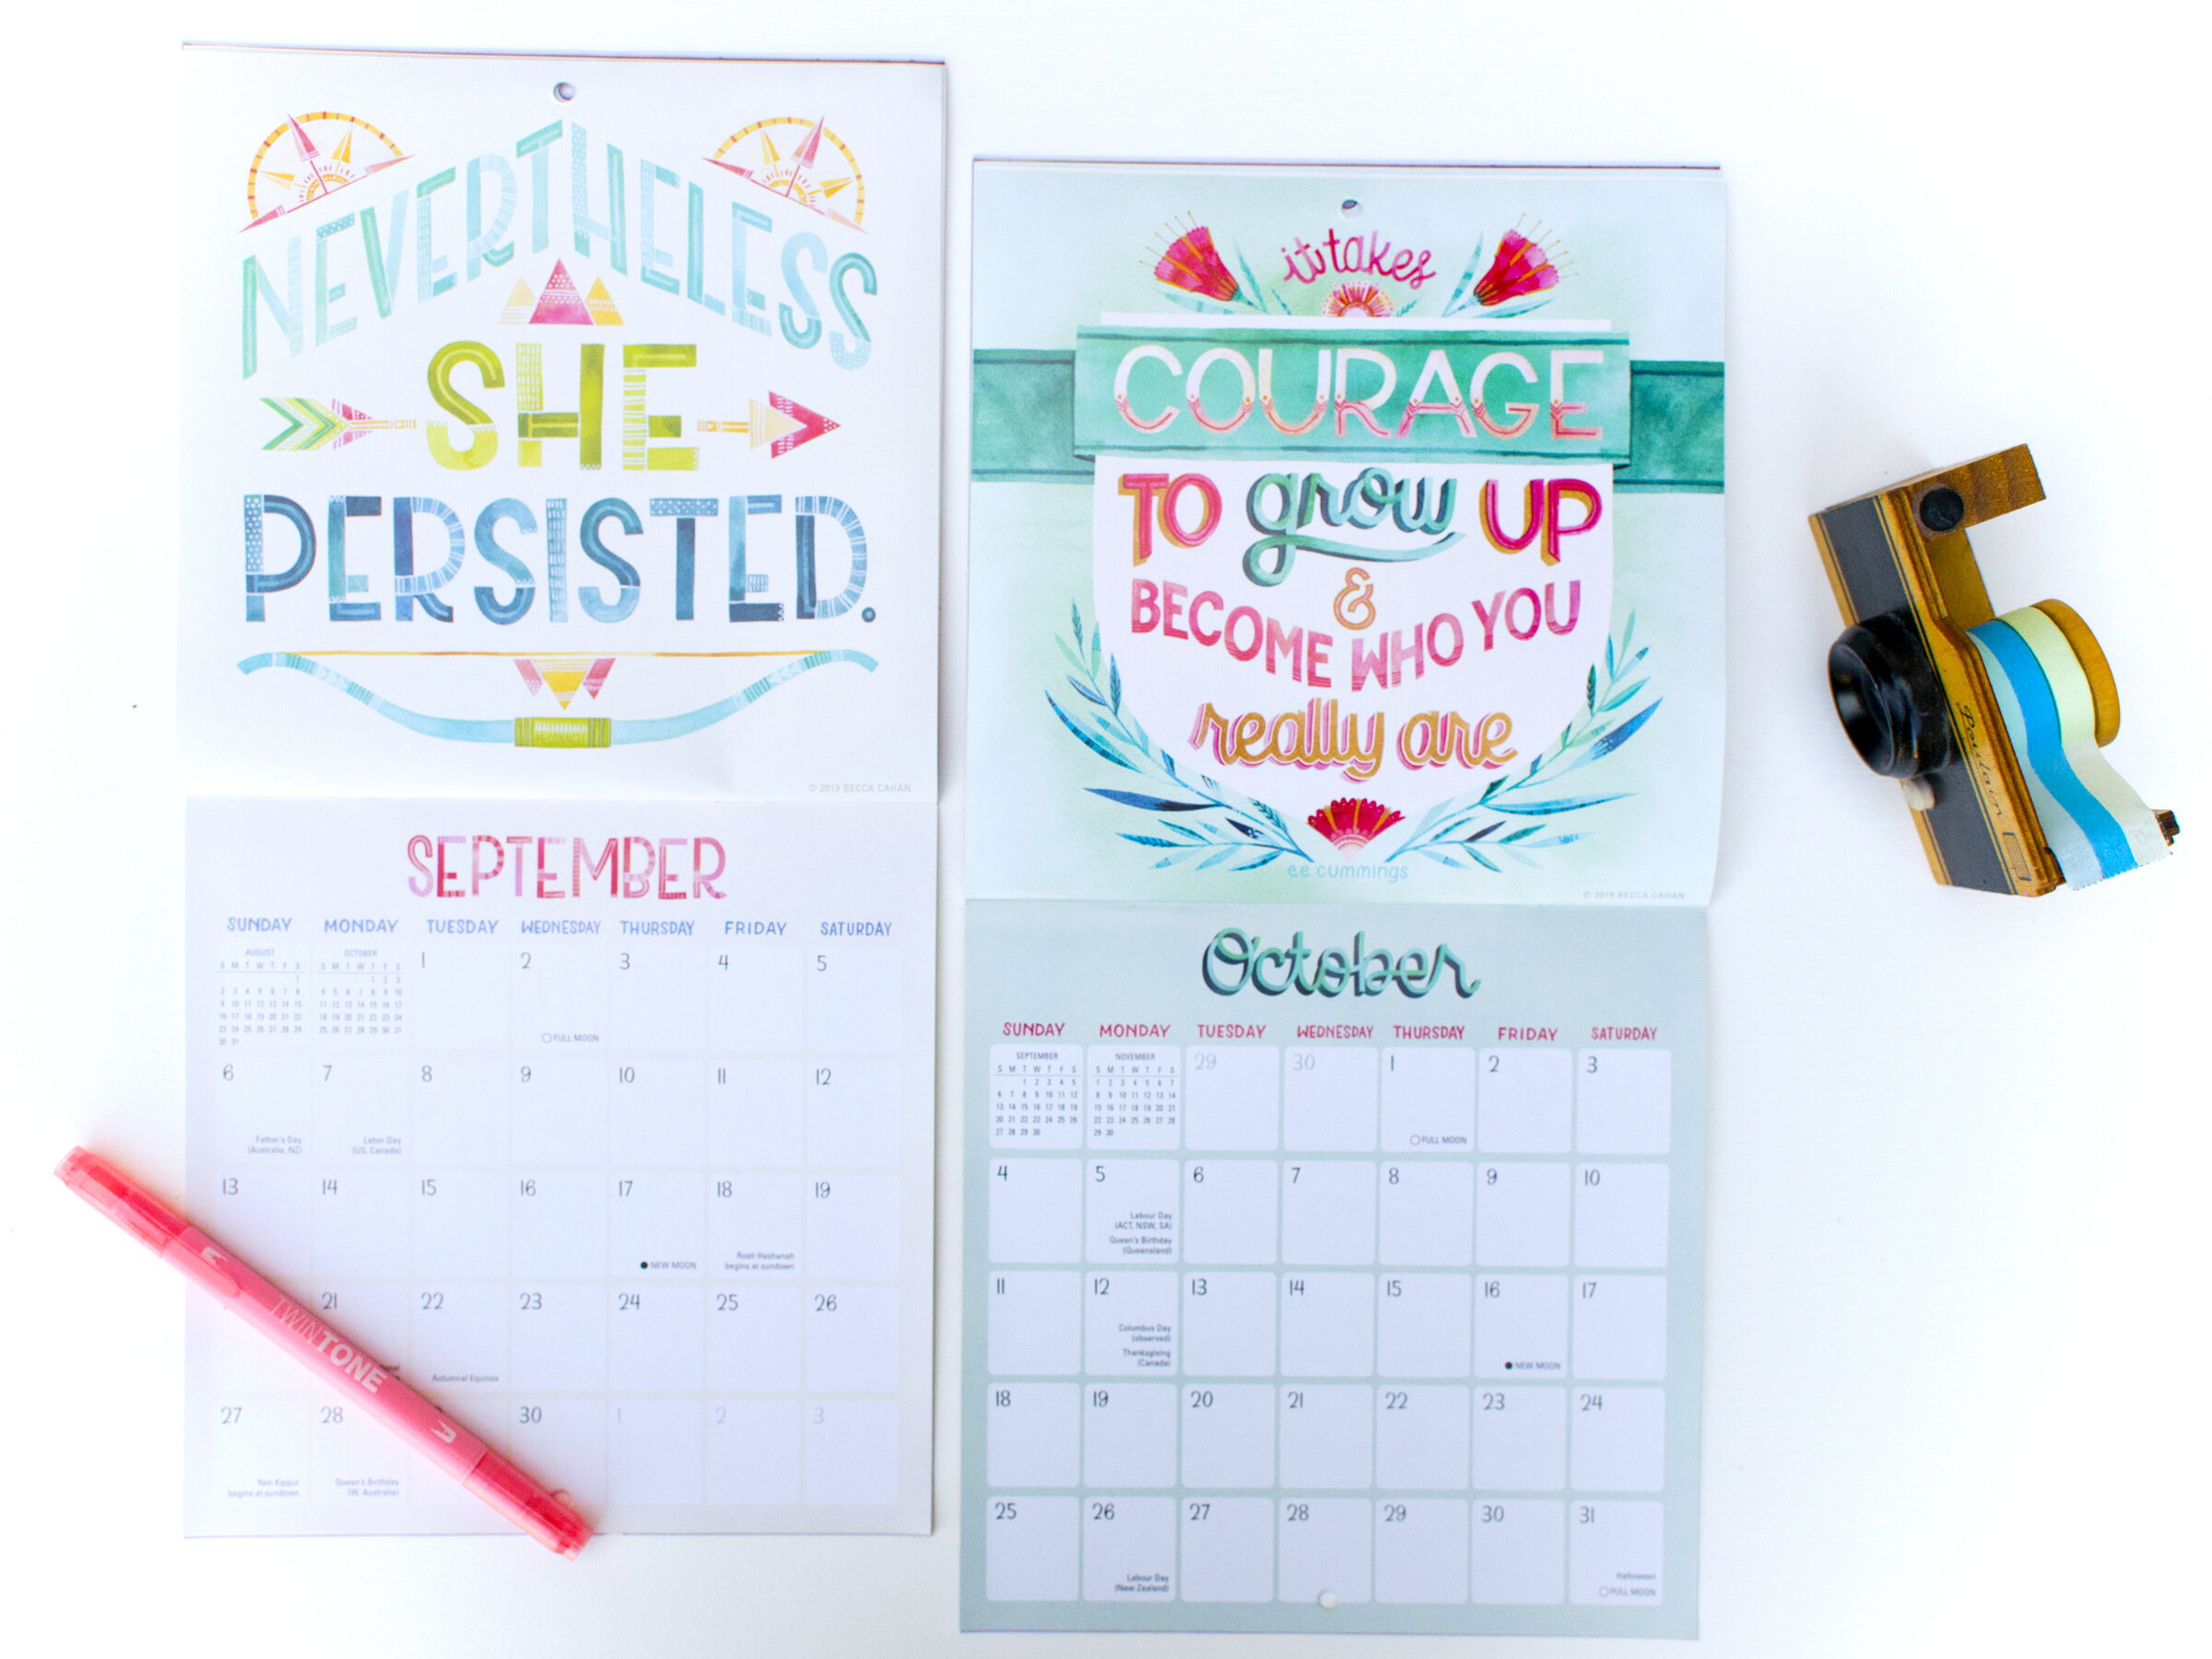 2020 Sellers Publishing "She Persisted" Mini Wall Calendar Illustrated by Becca Cahan